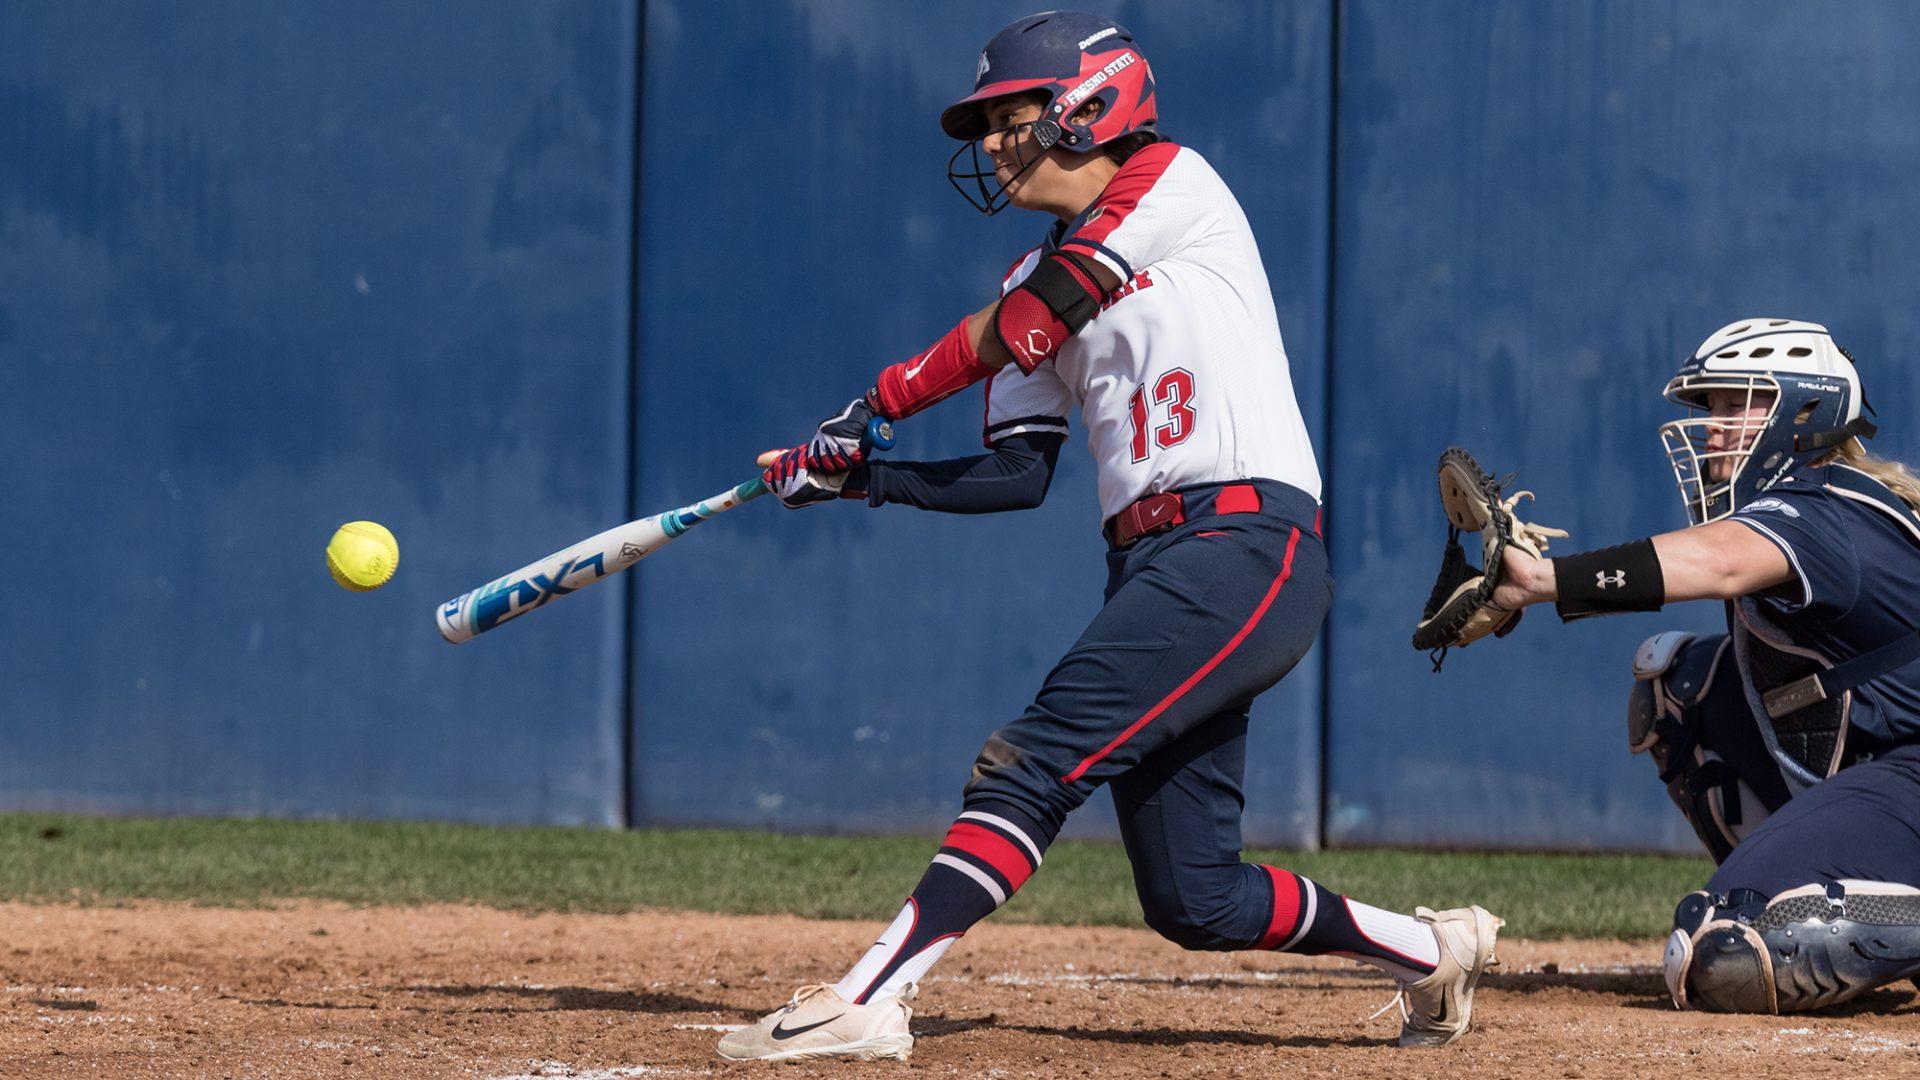 Senior Katie Castellon is leading the Mountain West Conference in slugging percentage, hitting .442 and is third in batting average and on-base percentage this season. (Fresno State Athletics) 
